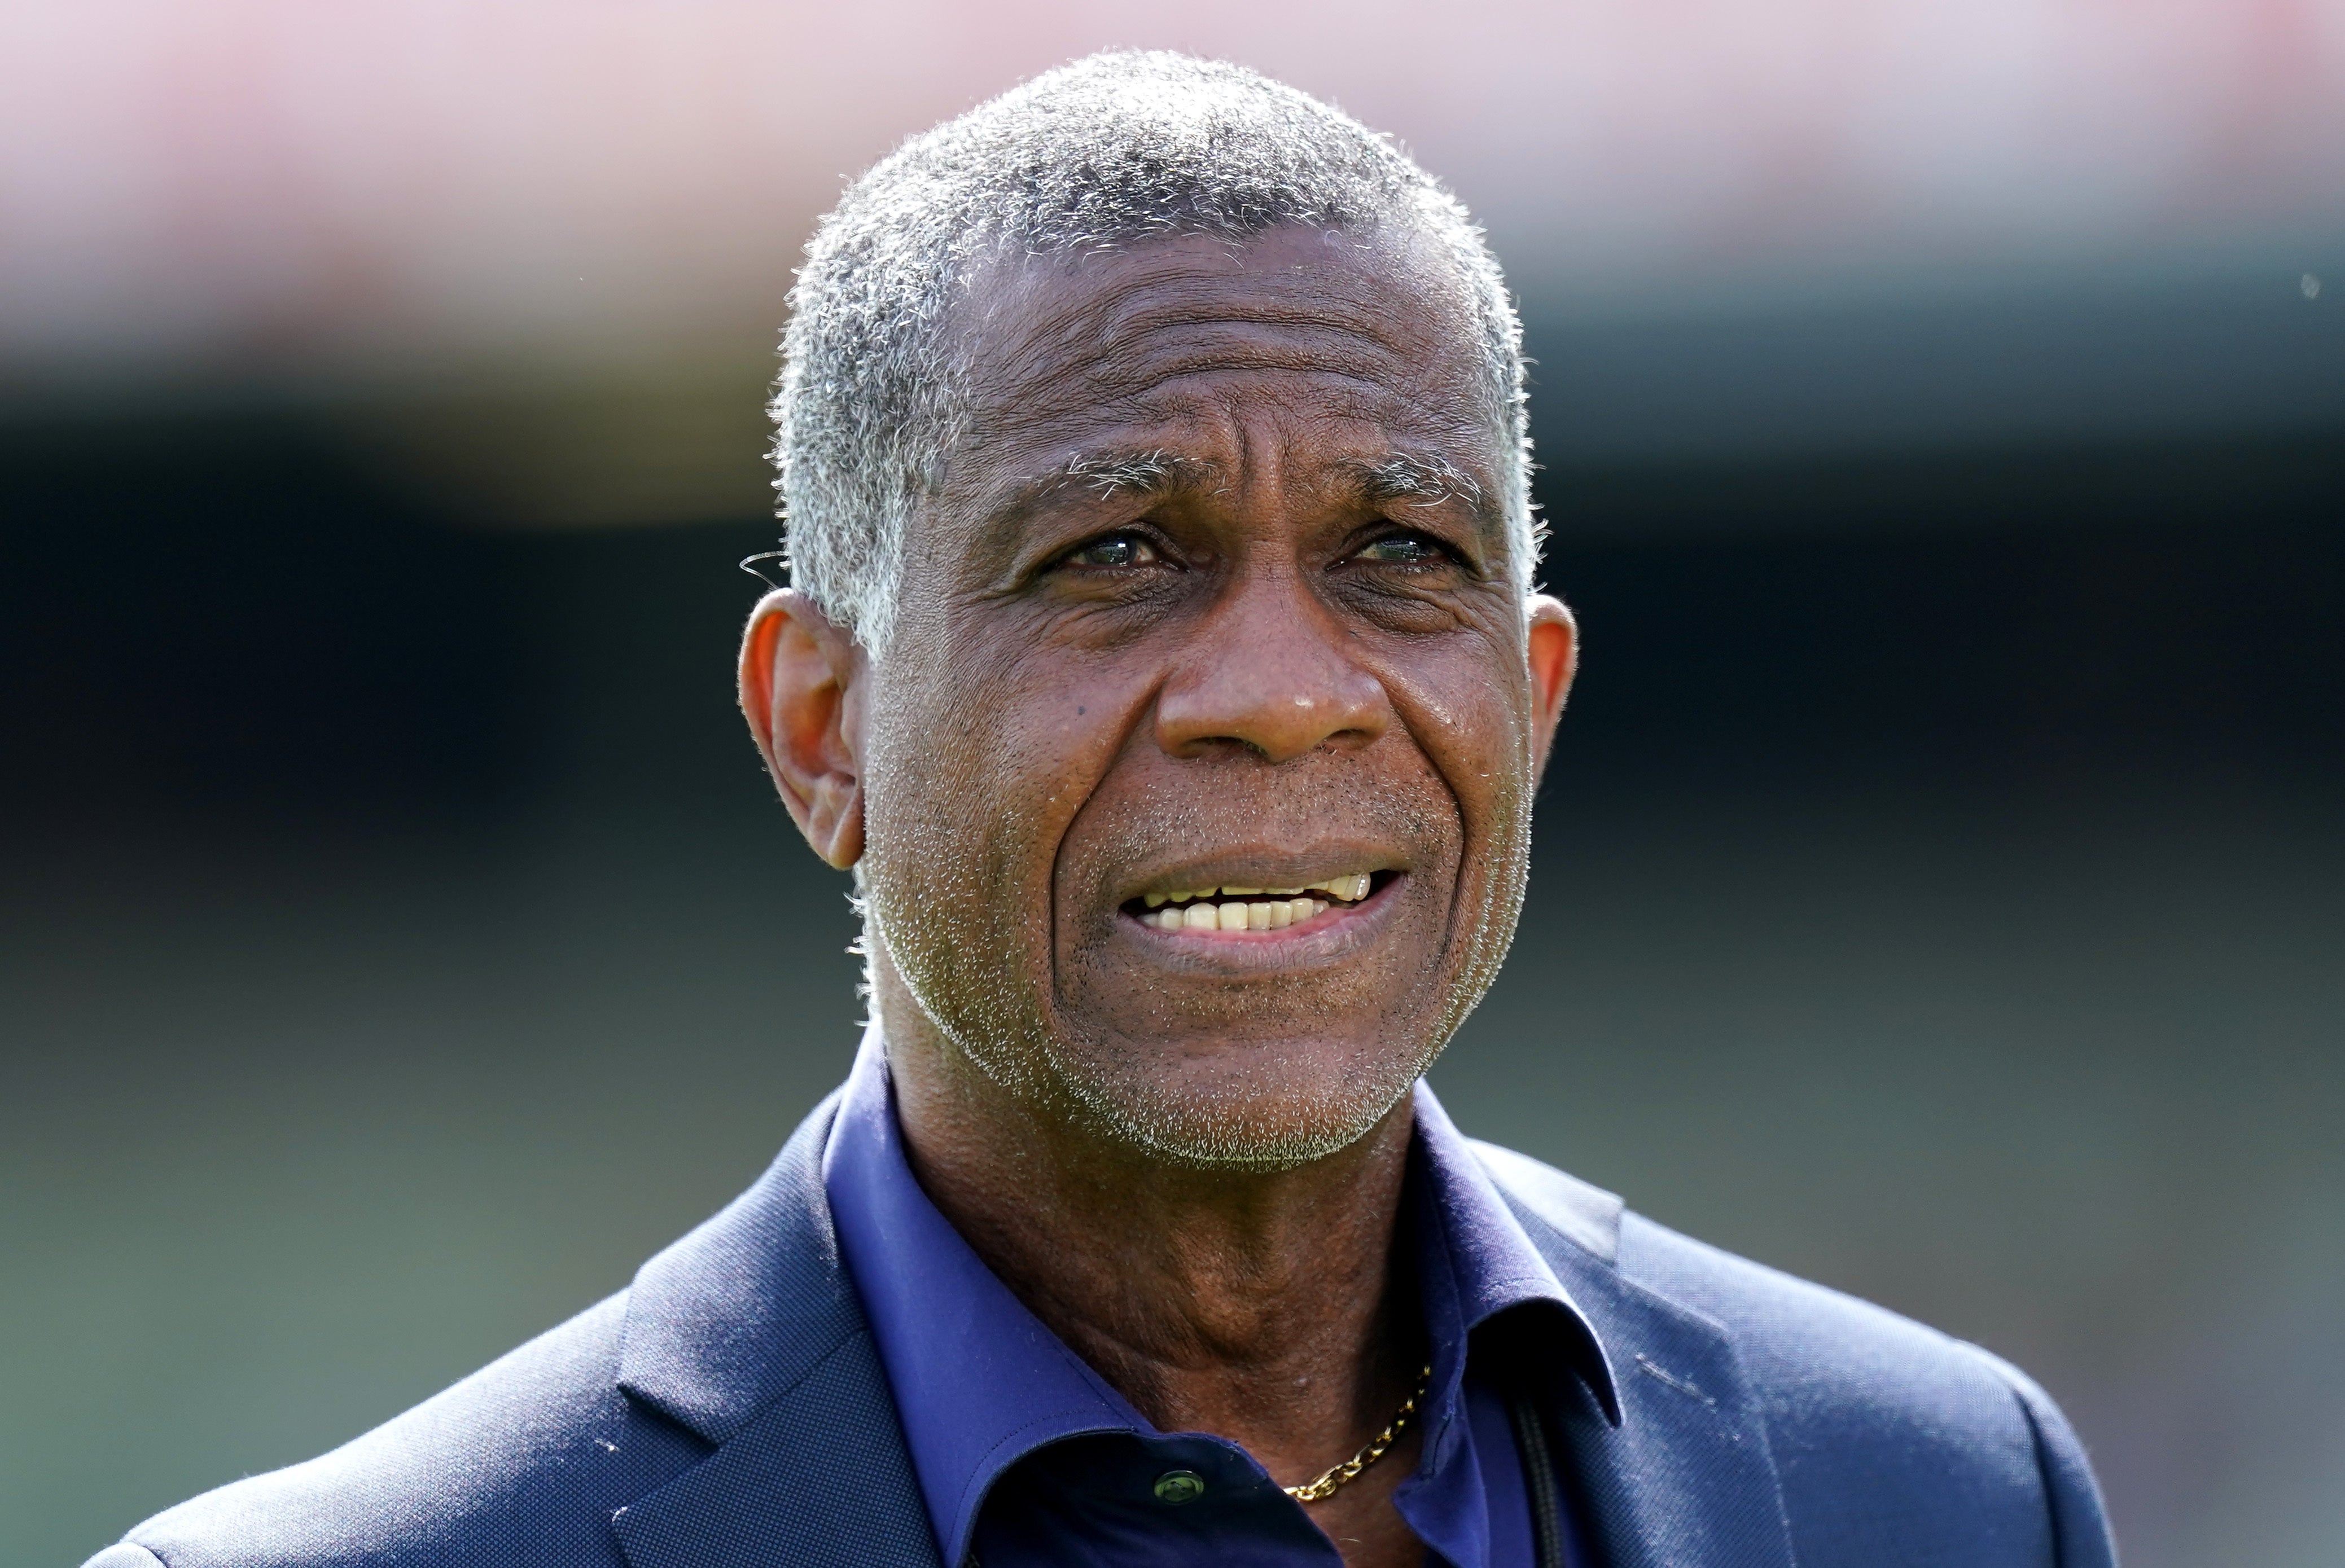 Former West Indies paceman Michael Holding felt the ECB’s statement had “no substance” (Mike Egerton/PA)